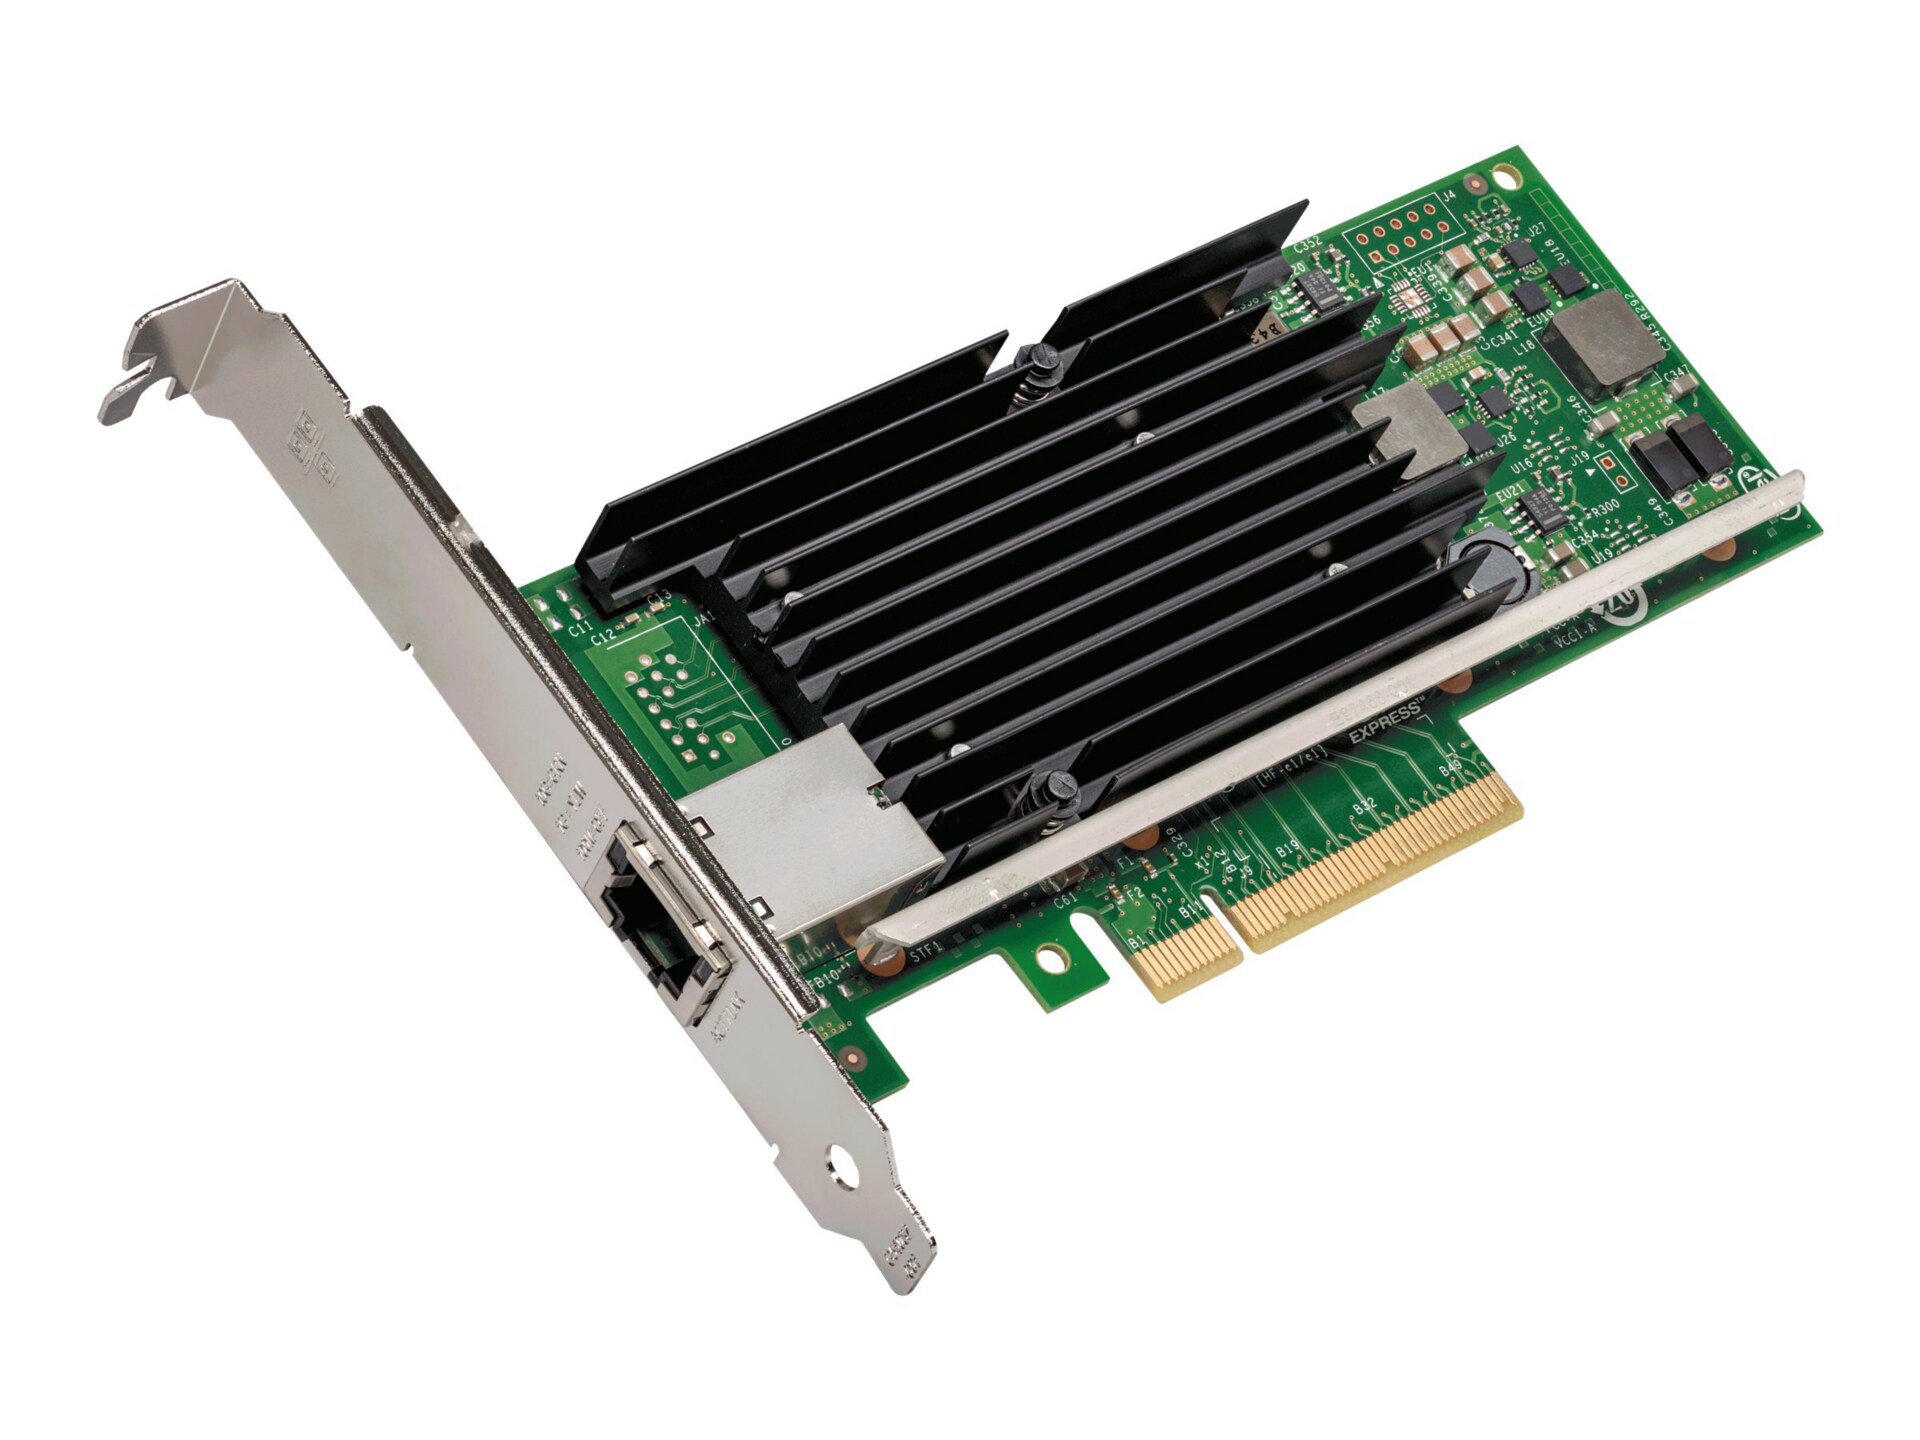 Intel Ethernet Converged Network Adapter X540-T1 - network adapter - PCIe 2